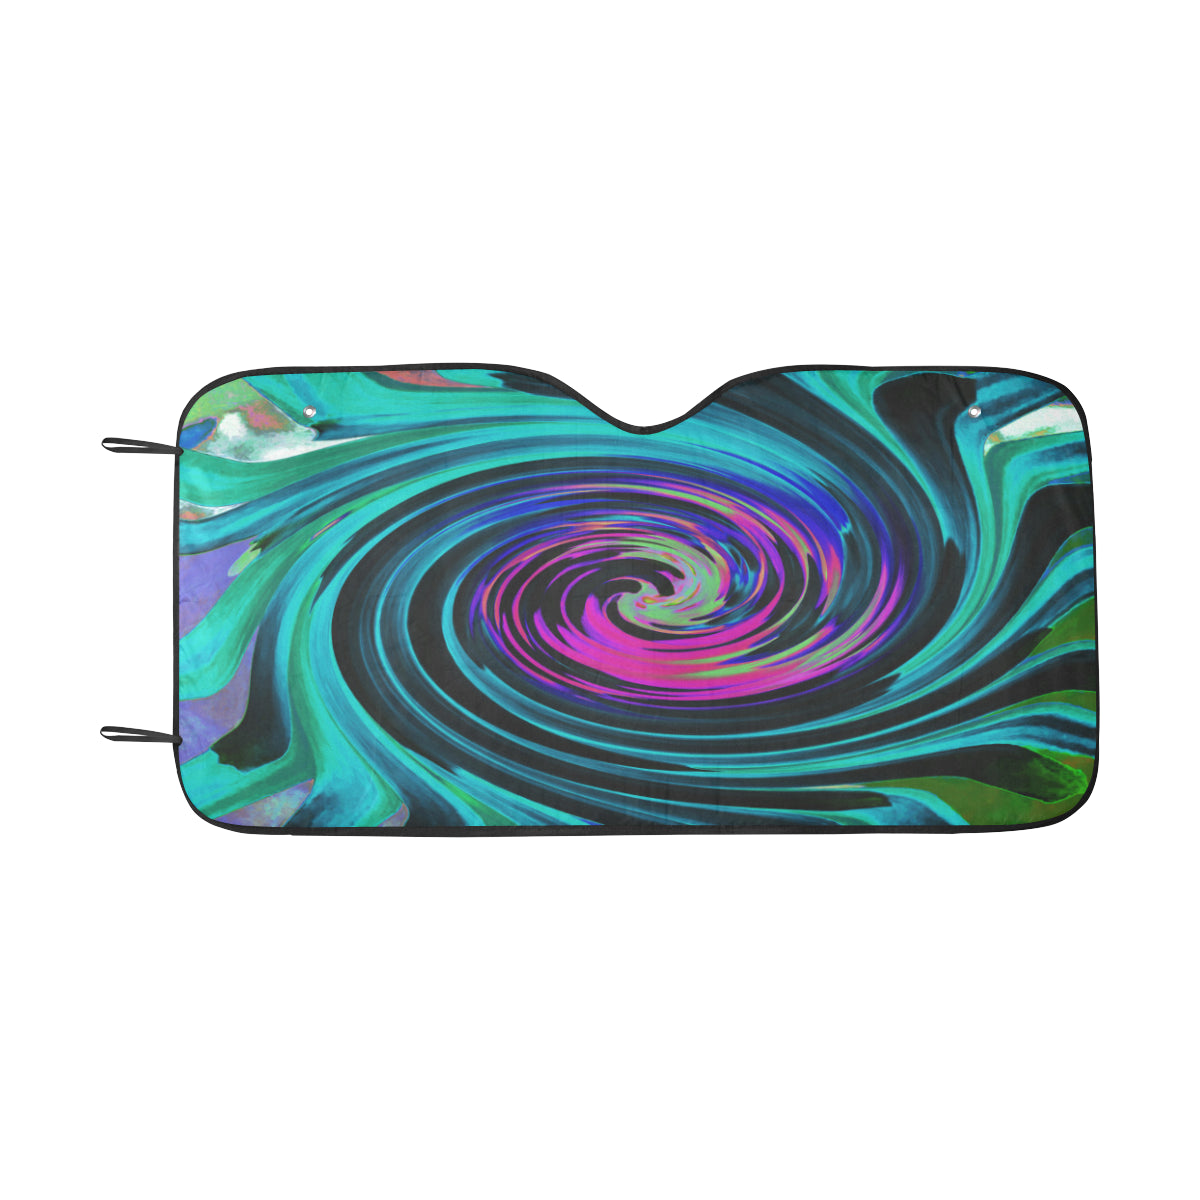 Auto Sun Shades, Dramatic Black and Turquoise Abstract Retro Twirl